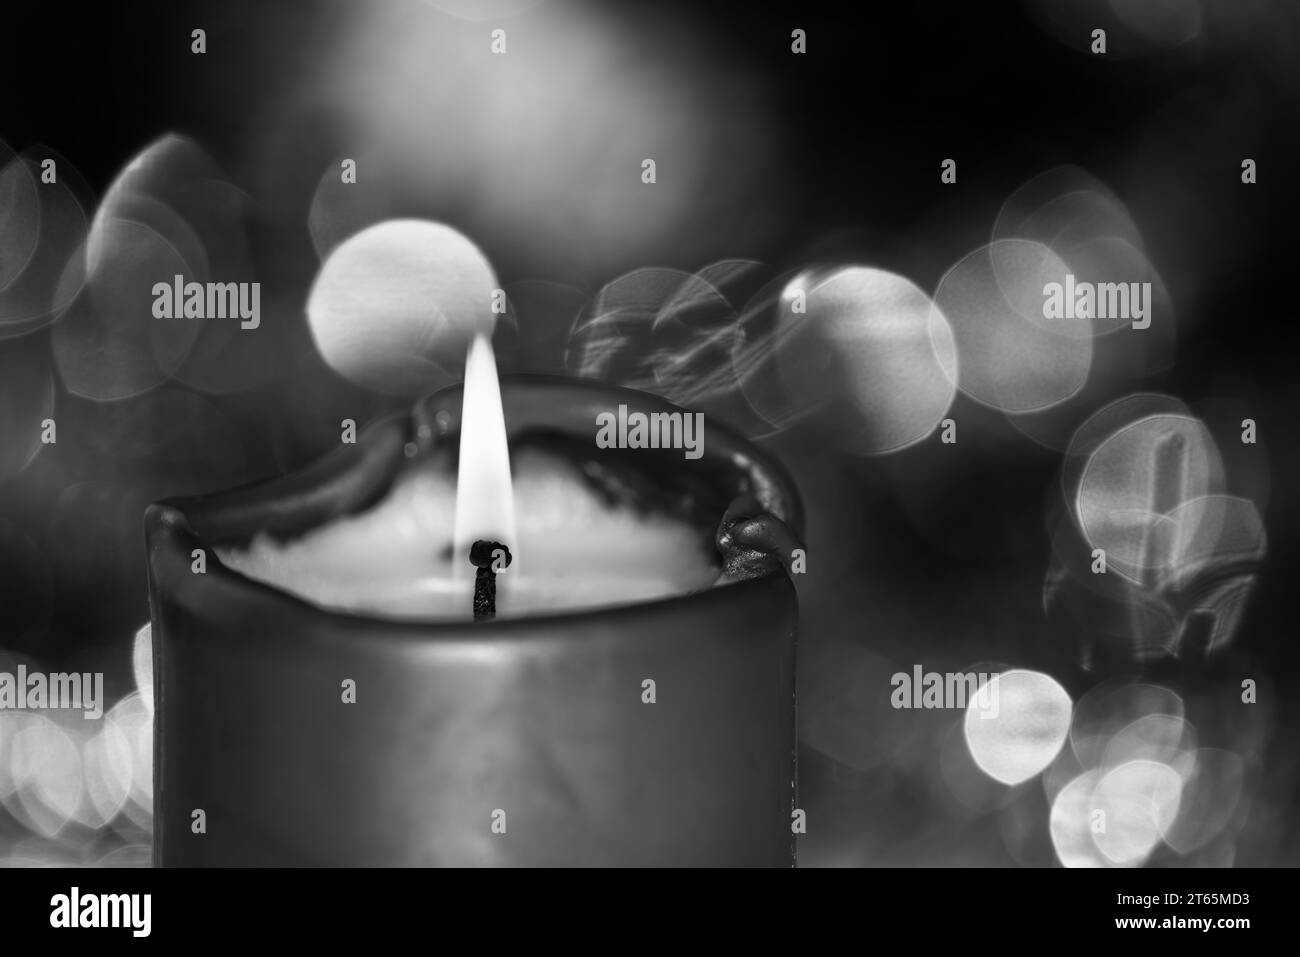 Burning candle against blurred background in black and white colors. Focus on the flame Stock Photo